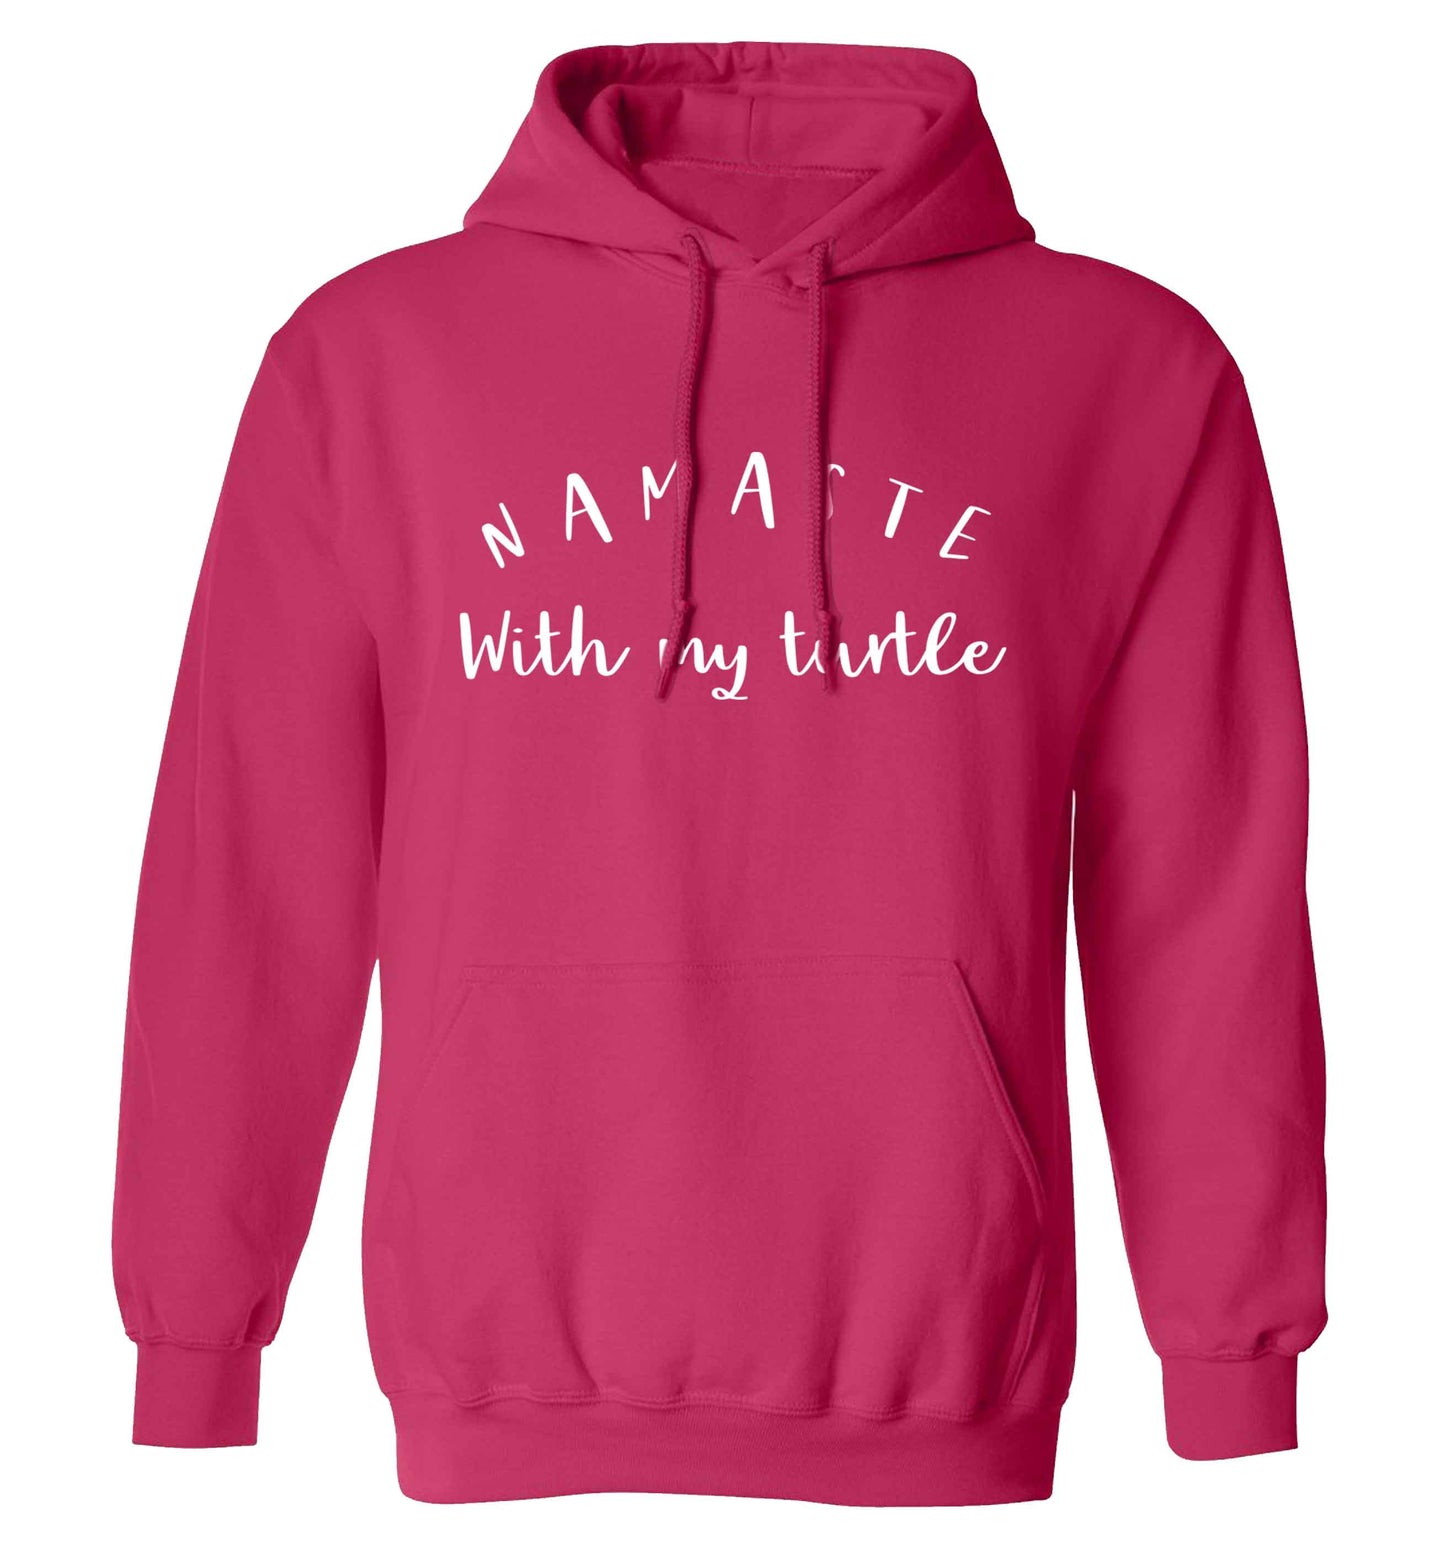 Namaste with my turtle adults unisex pink hoodie 2XL